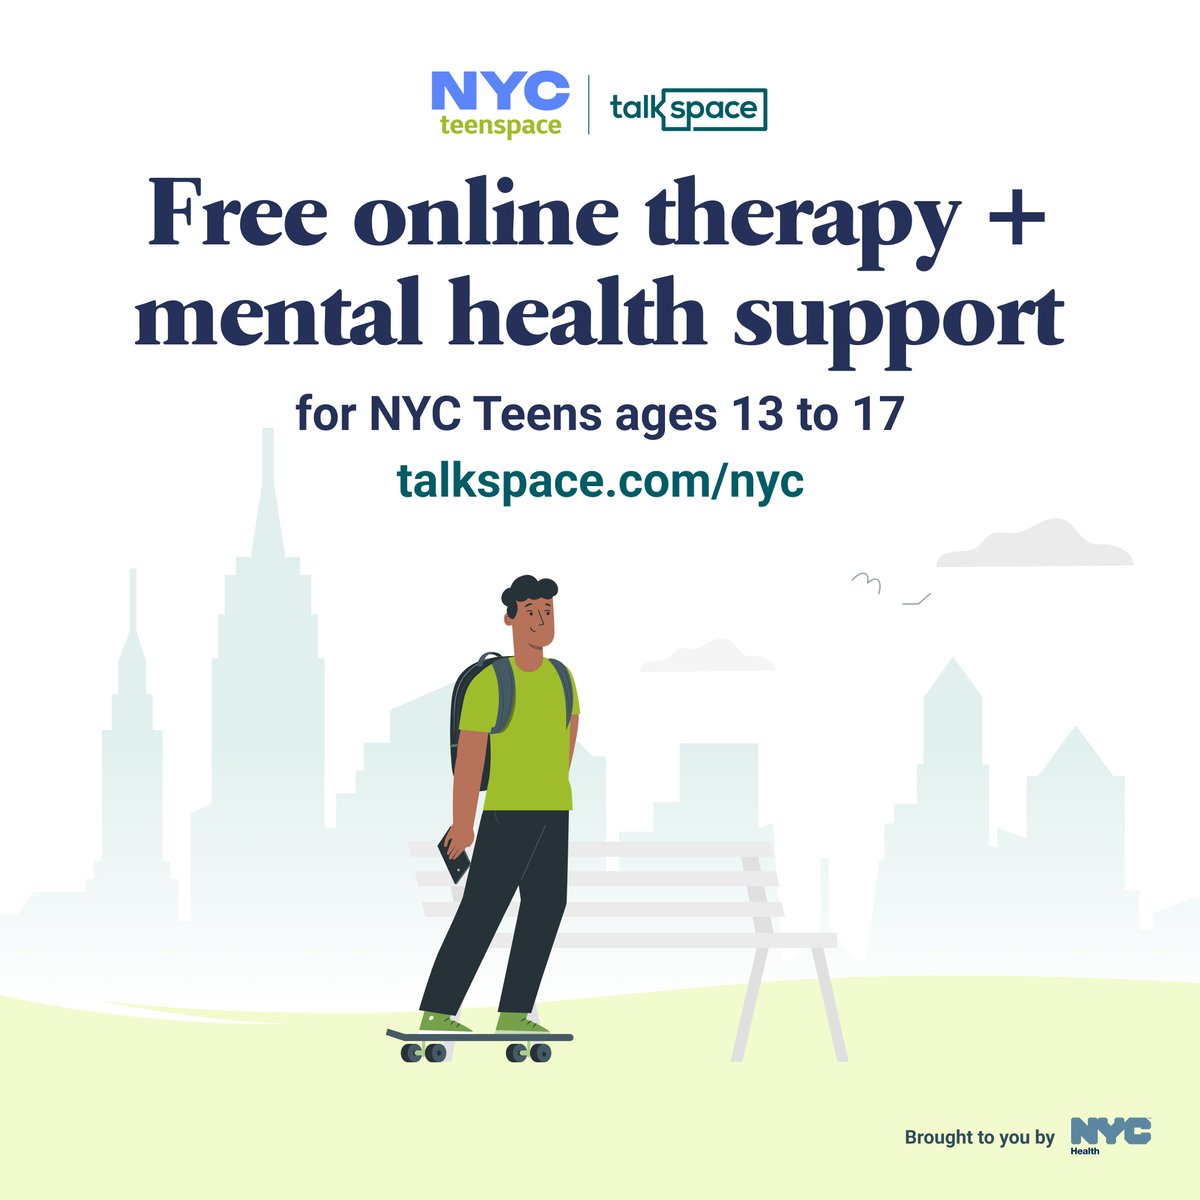 May is #MentalHealthAwareness month. Need someone to talk to about your everyday ups and downs? NYC Teenspace is a free mental health support program available to any NYC teen age 13 to 17, offered by @nychealthy and powered by @talkspace. Learn more: nyc.gov/teenspace